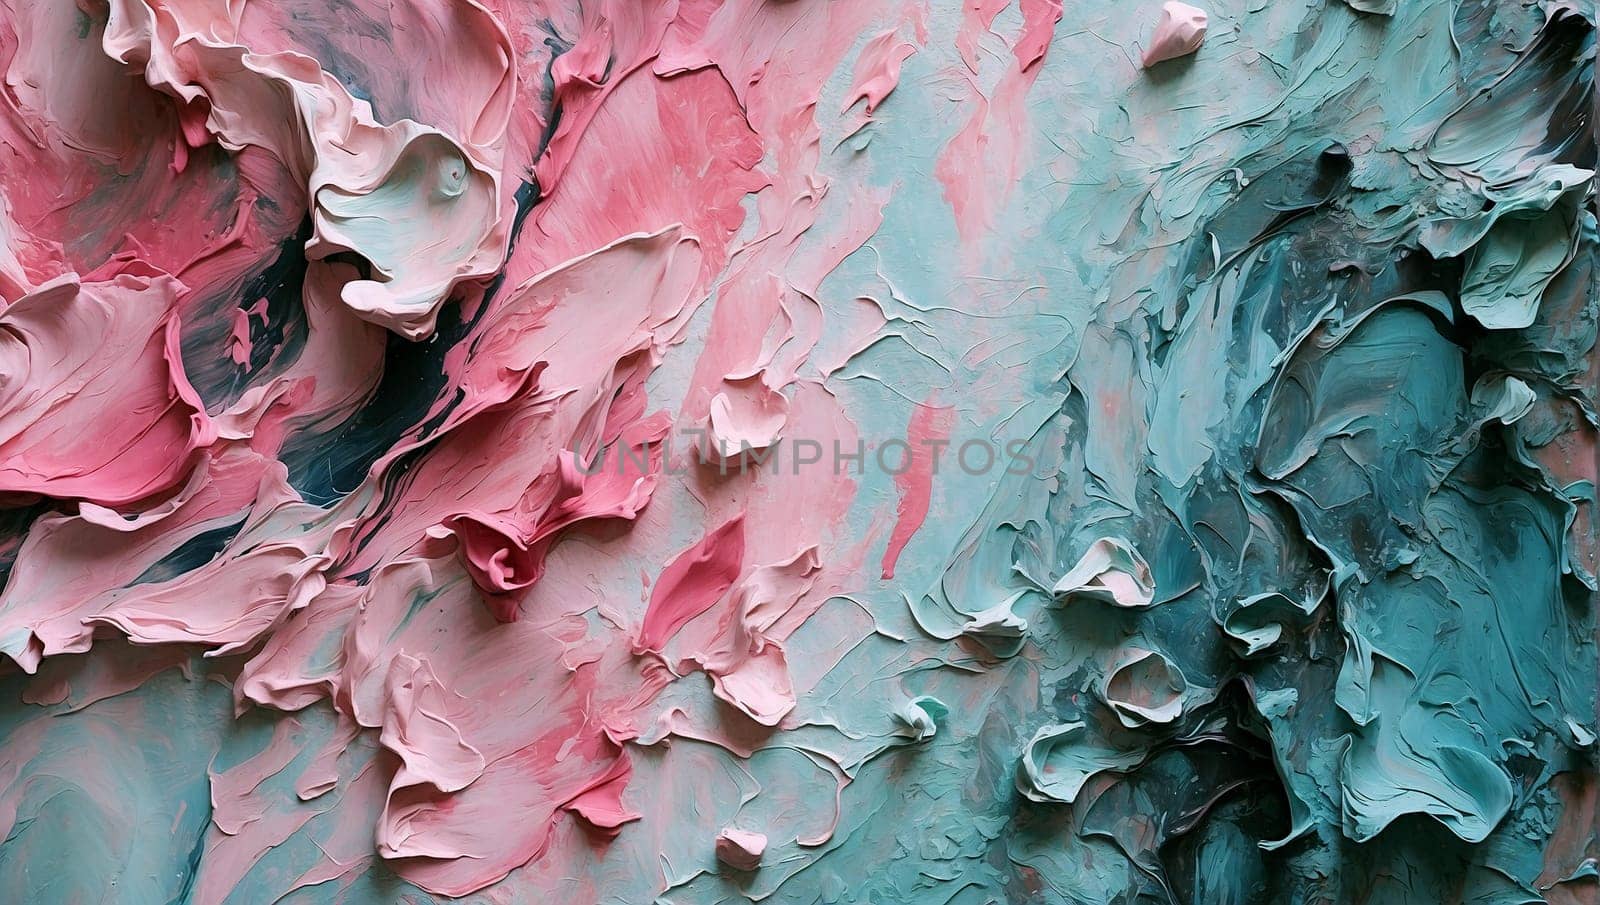 blue-pink texture, blue-green, abstract background by Севостьянов